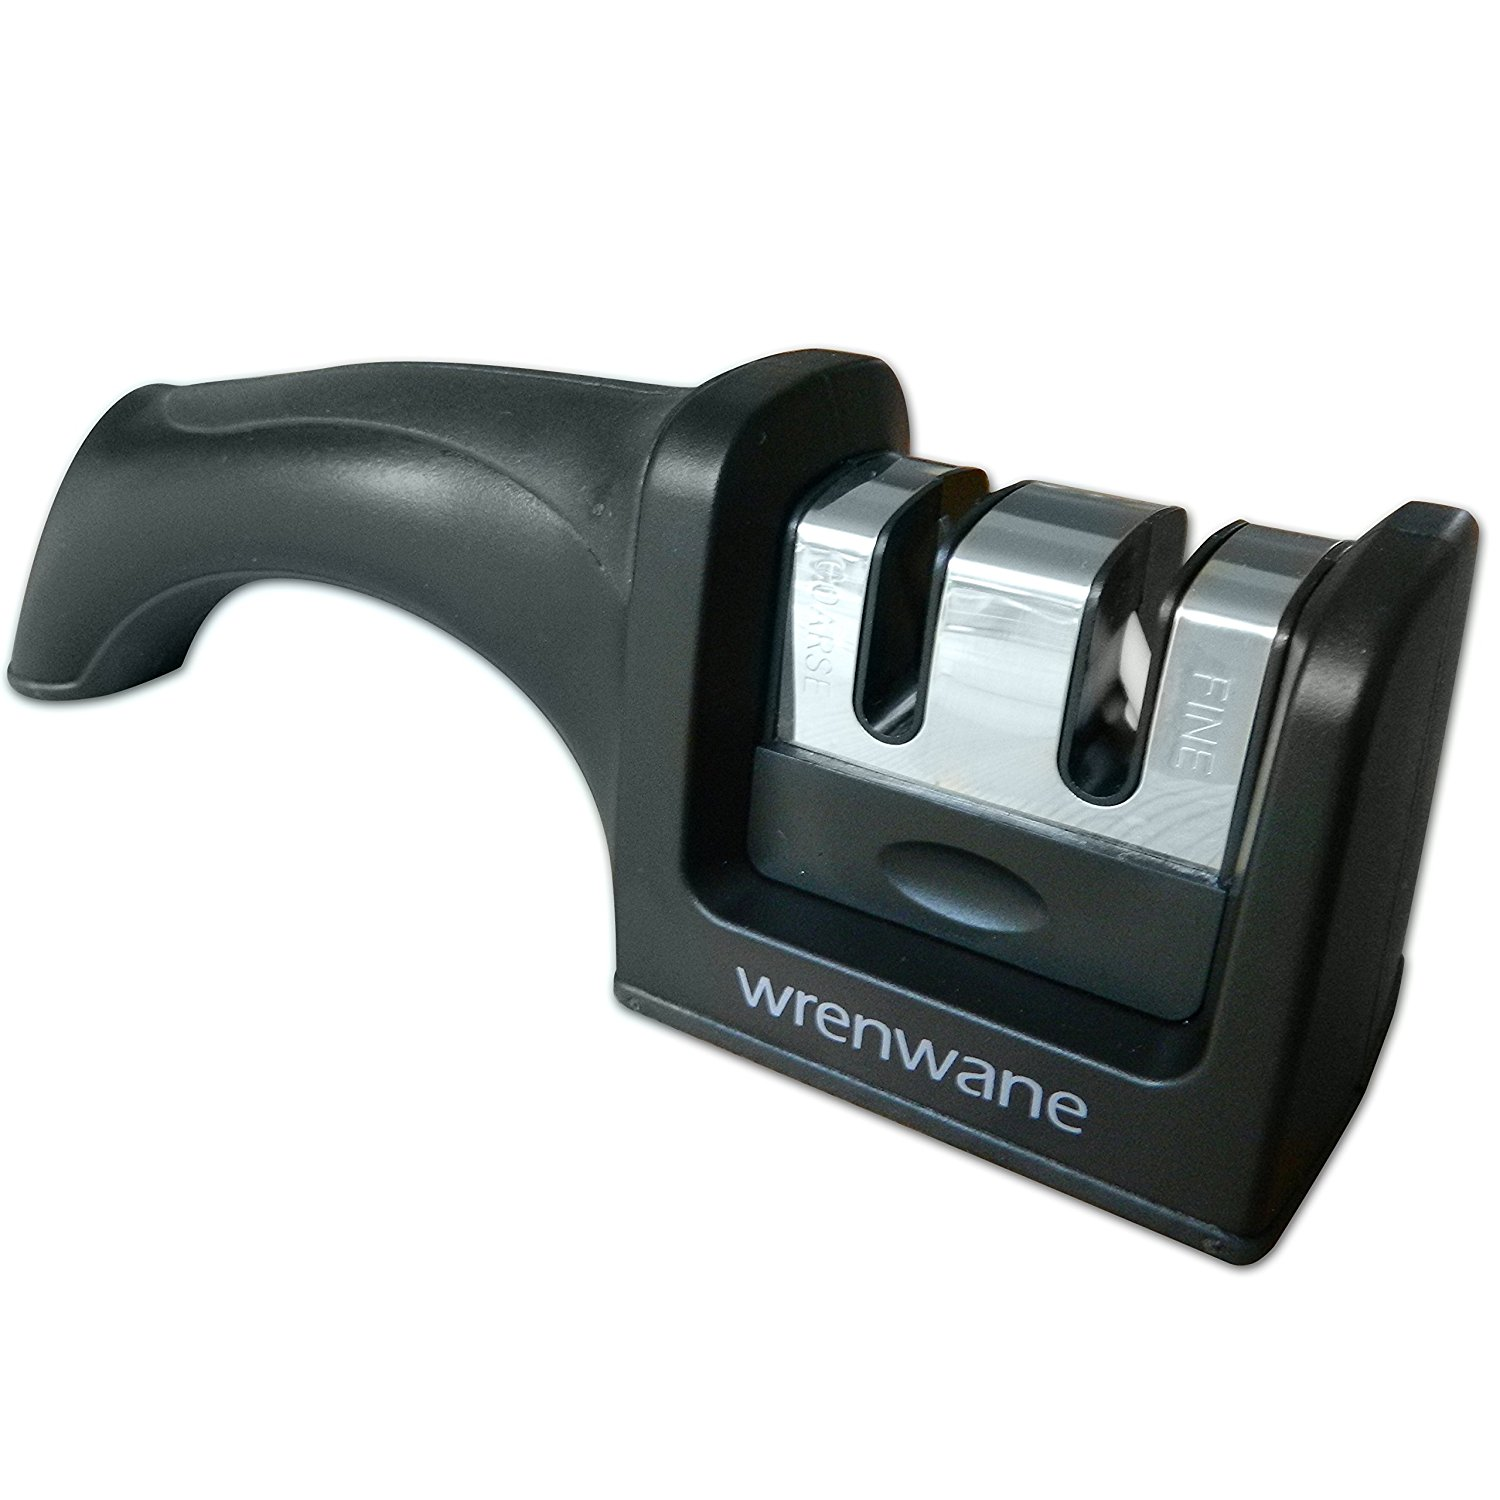 Wrenwane Kitchen Knife Sharpener (2 Stage) Black Only $4.97! (Great Reviews Too!)